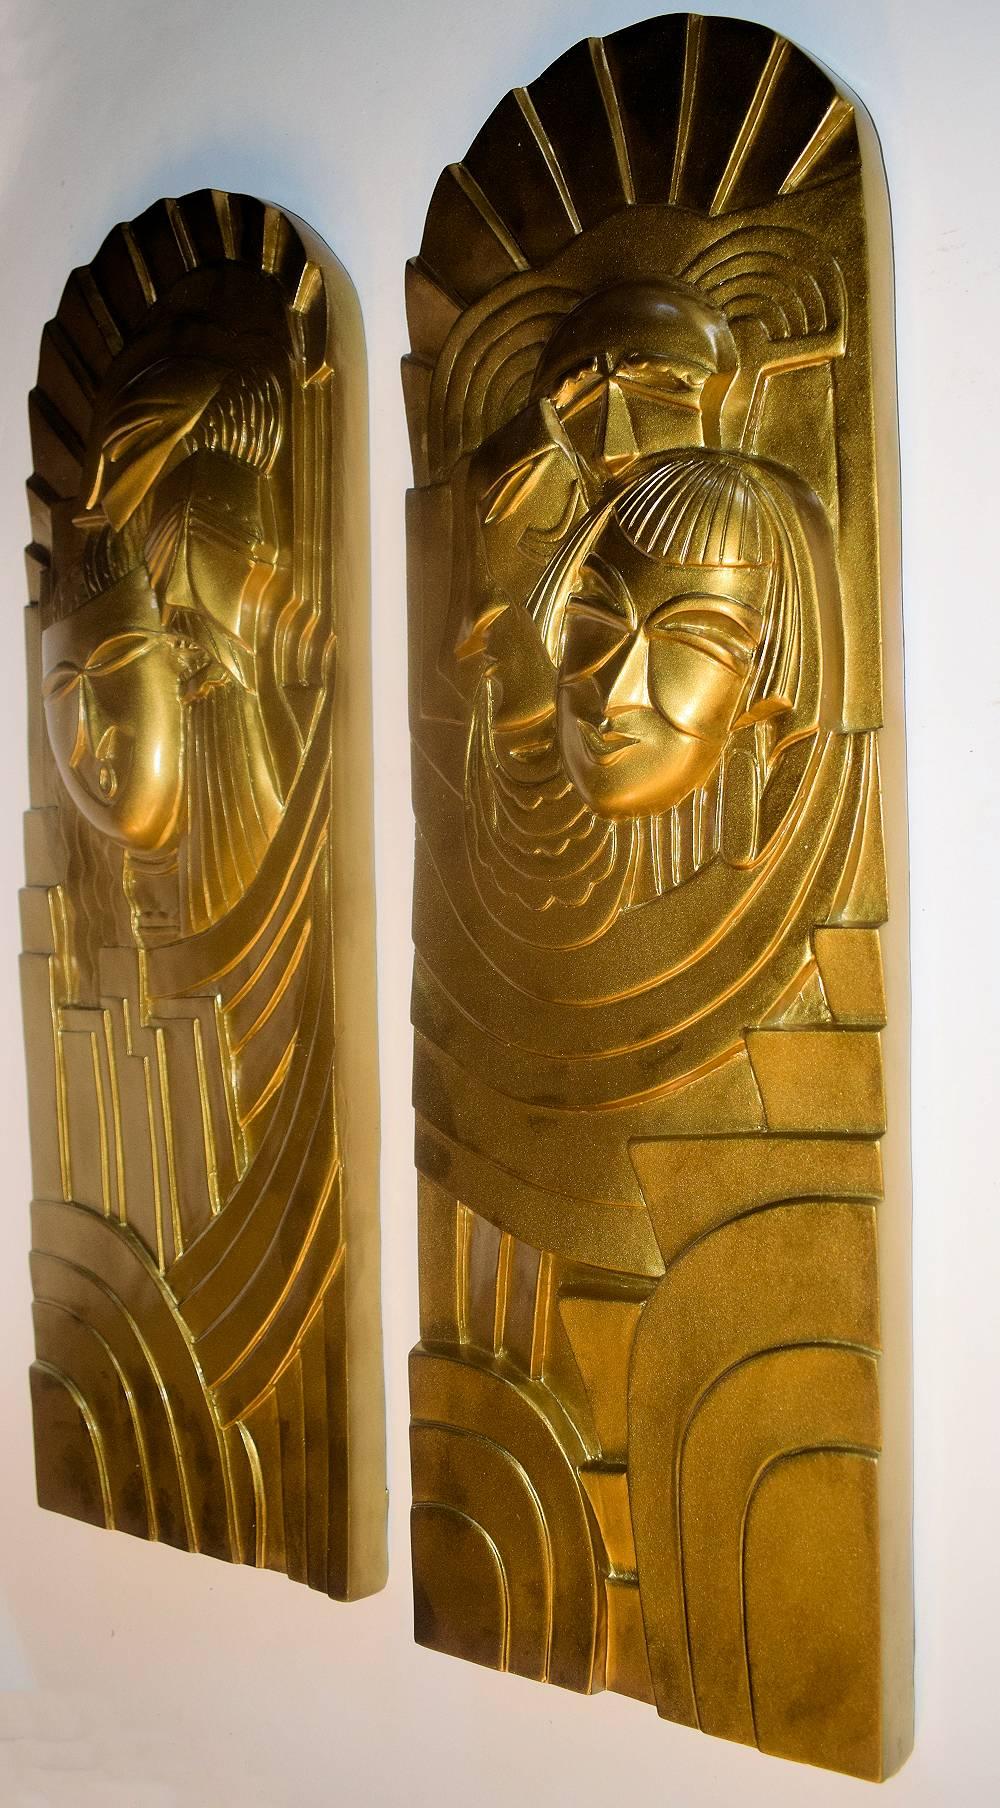 This is a super rare opportunity to acquire a pair of these beautifully reduced versions of the facade bas-relief of the Folies-Bergeres cabaret.
One time designer, Pico who created the central dancing lady facade over the entrance to the Folies